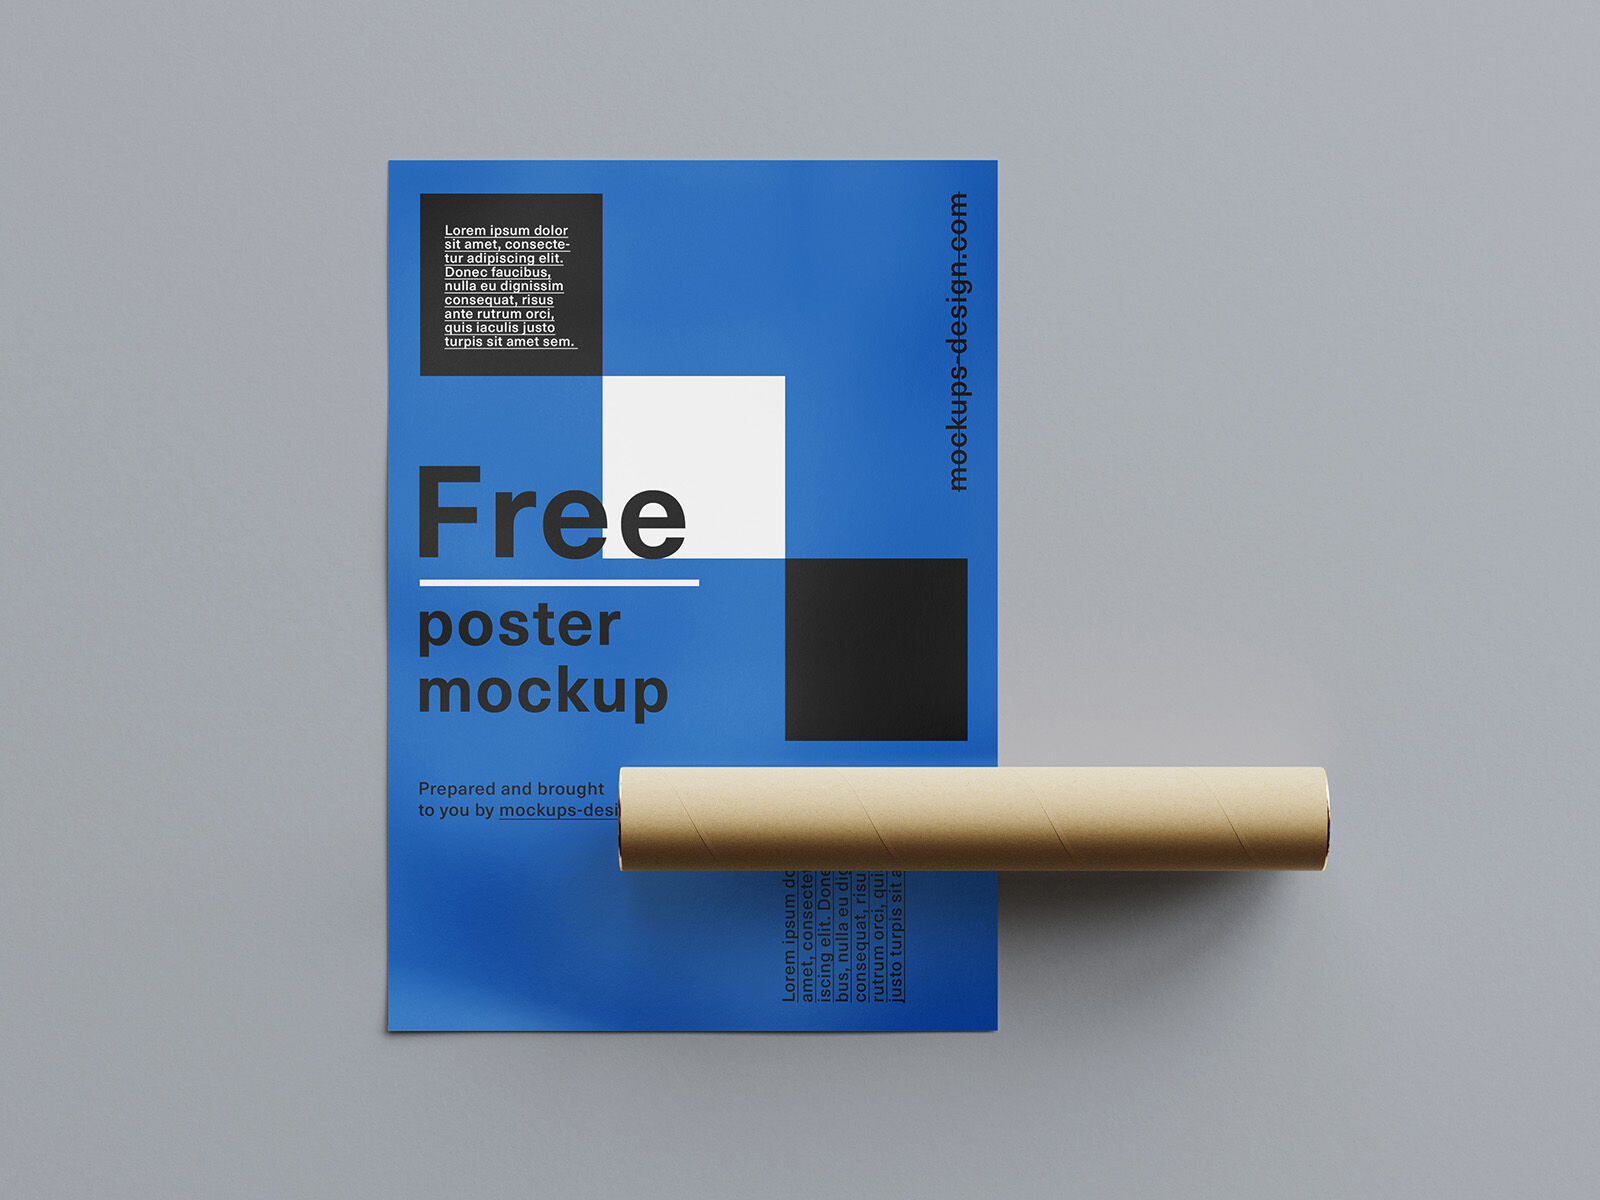 11 Mockups of Coated Posters in Different Views FREE PSD